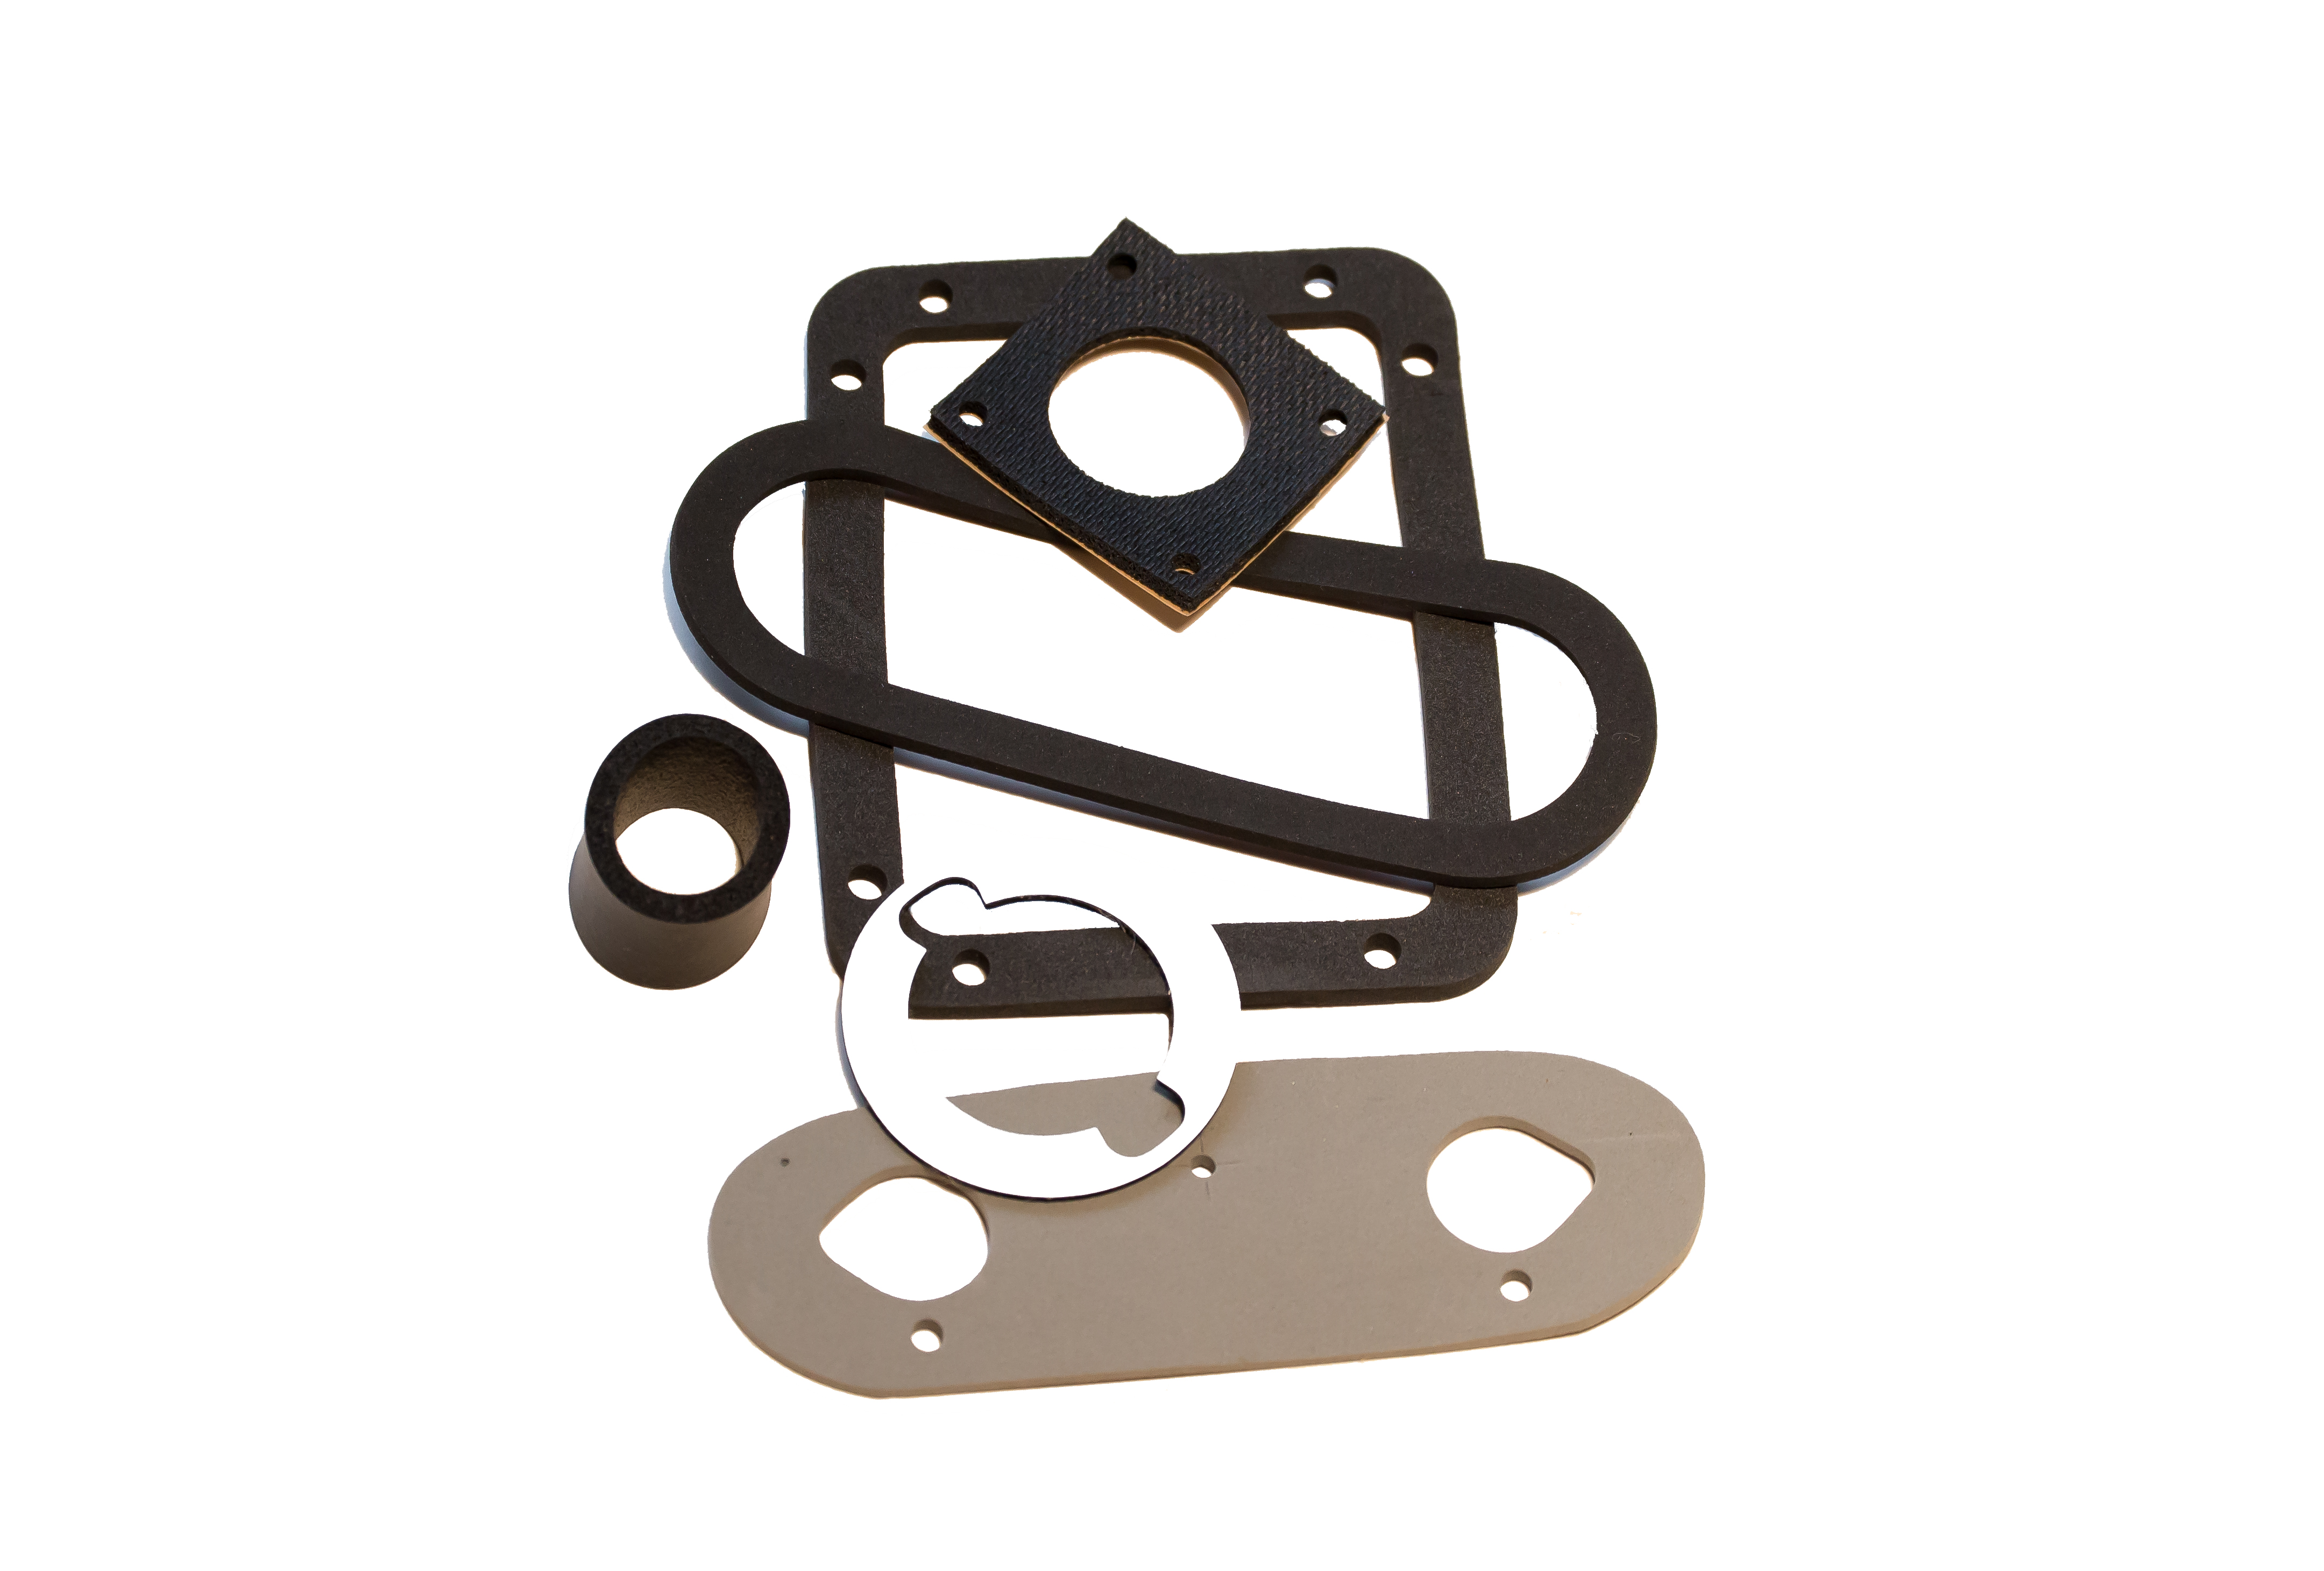 Rubber Gasket Materials: What is Best for Your Parts?